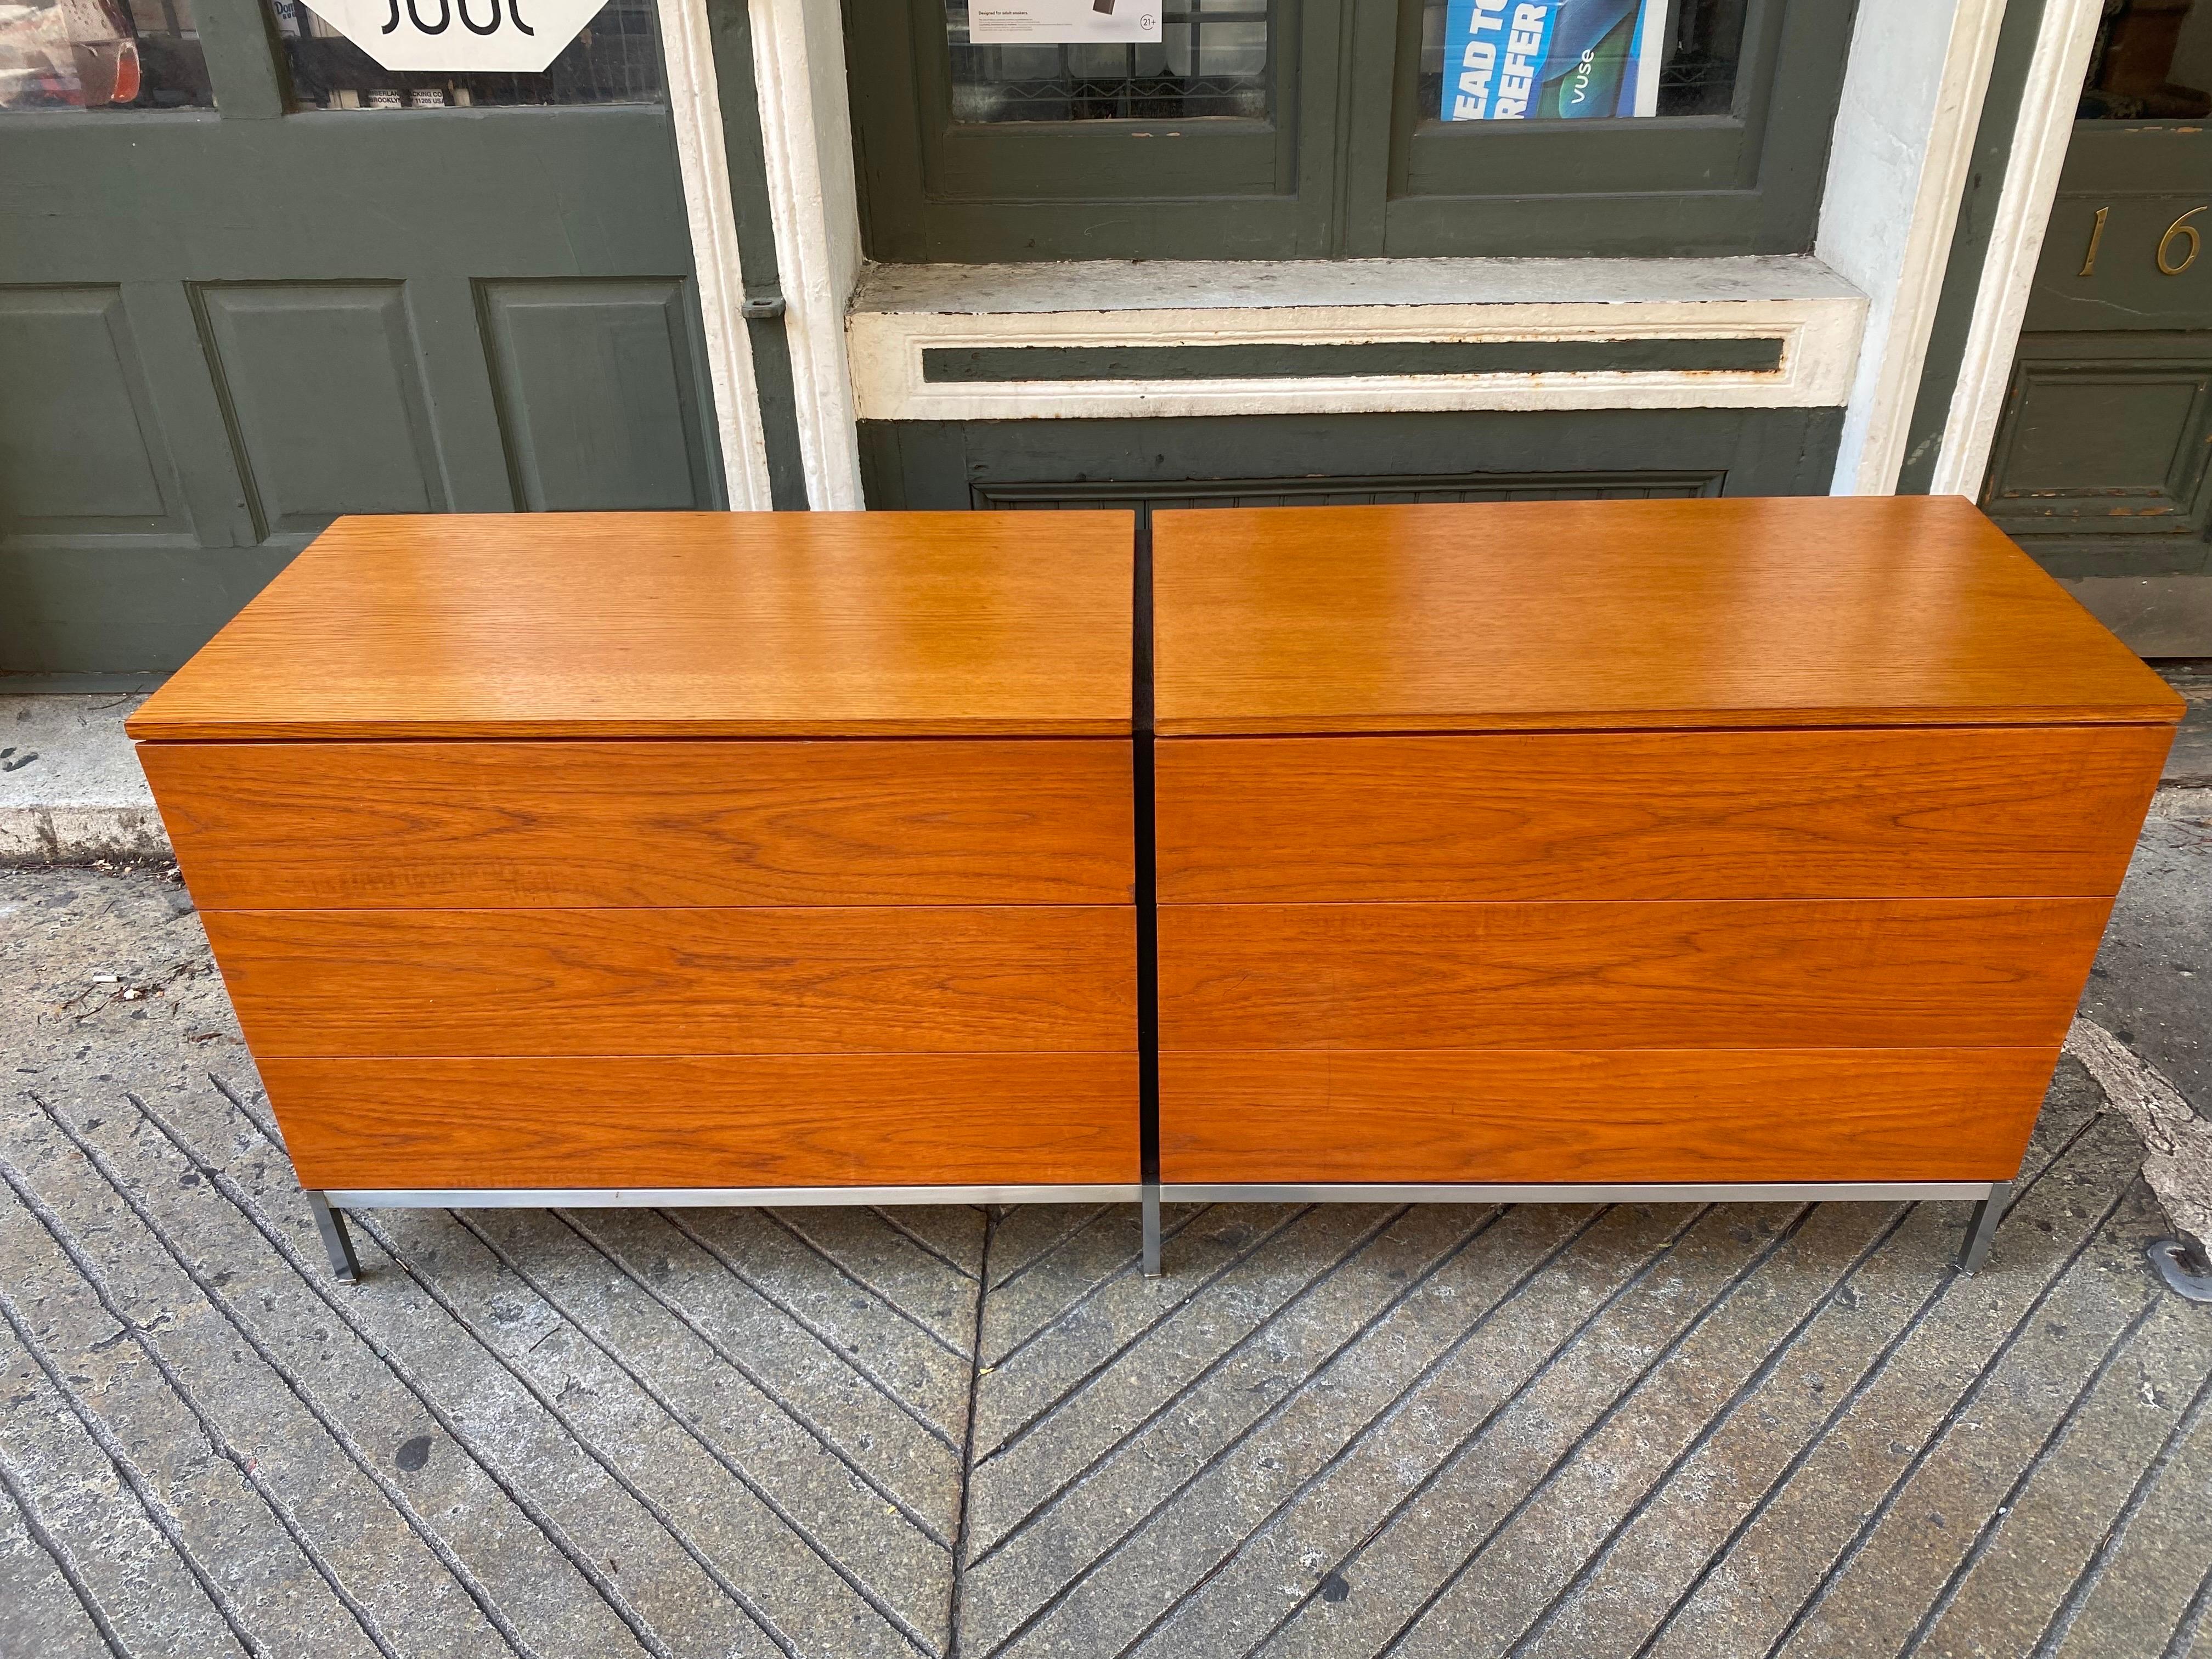 Florence Knoll for Knoll Double Teak Dresser on chrome stainless steel base with adjustable feet.  Top newly refinished, entire cabinet cleaned and oiled.  Drawers retain white drawer divides.  One faint mark on the front of drawers in one area as